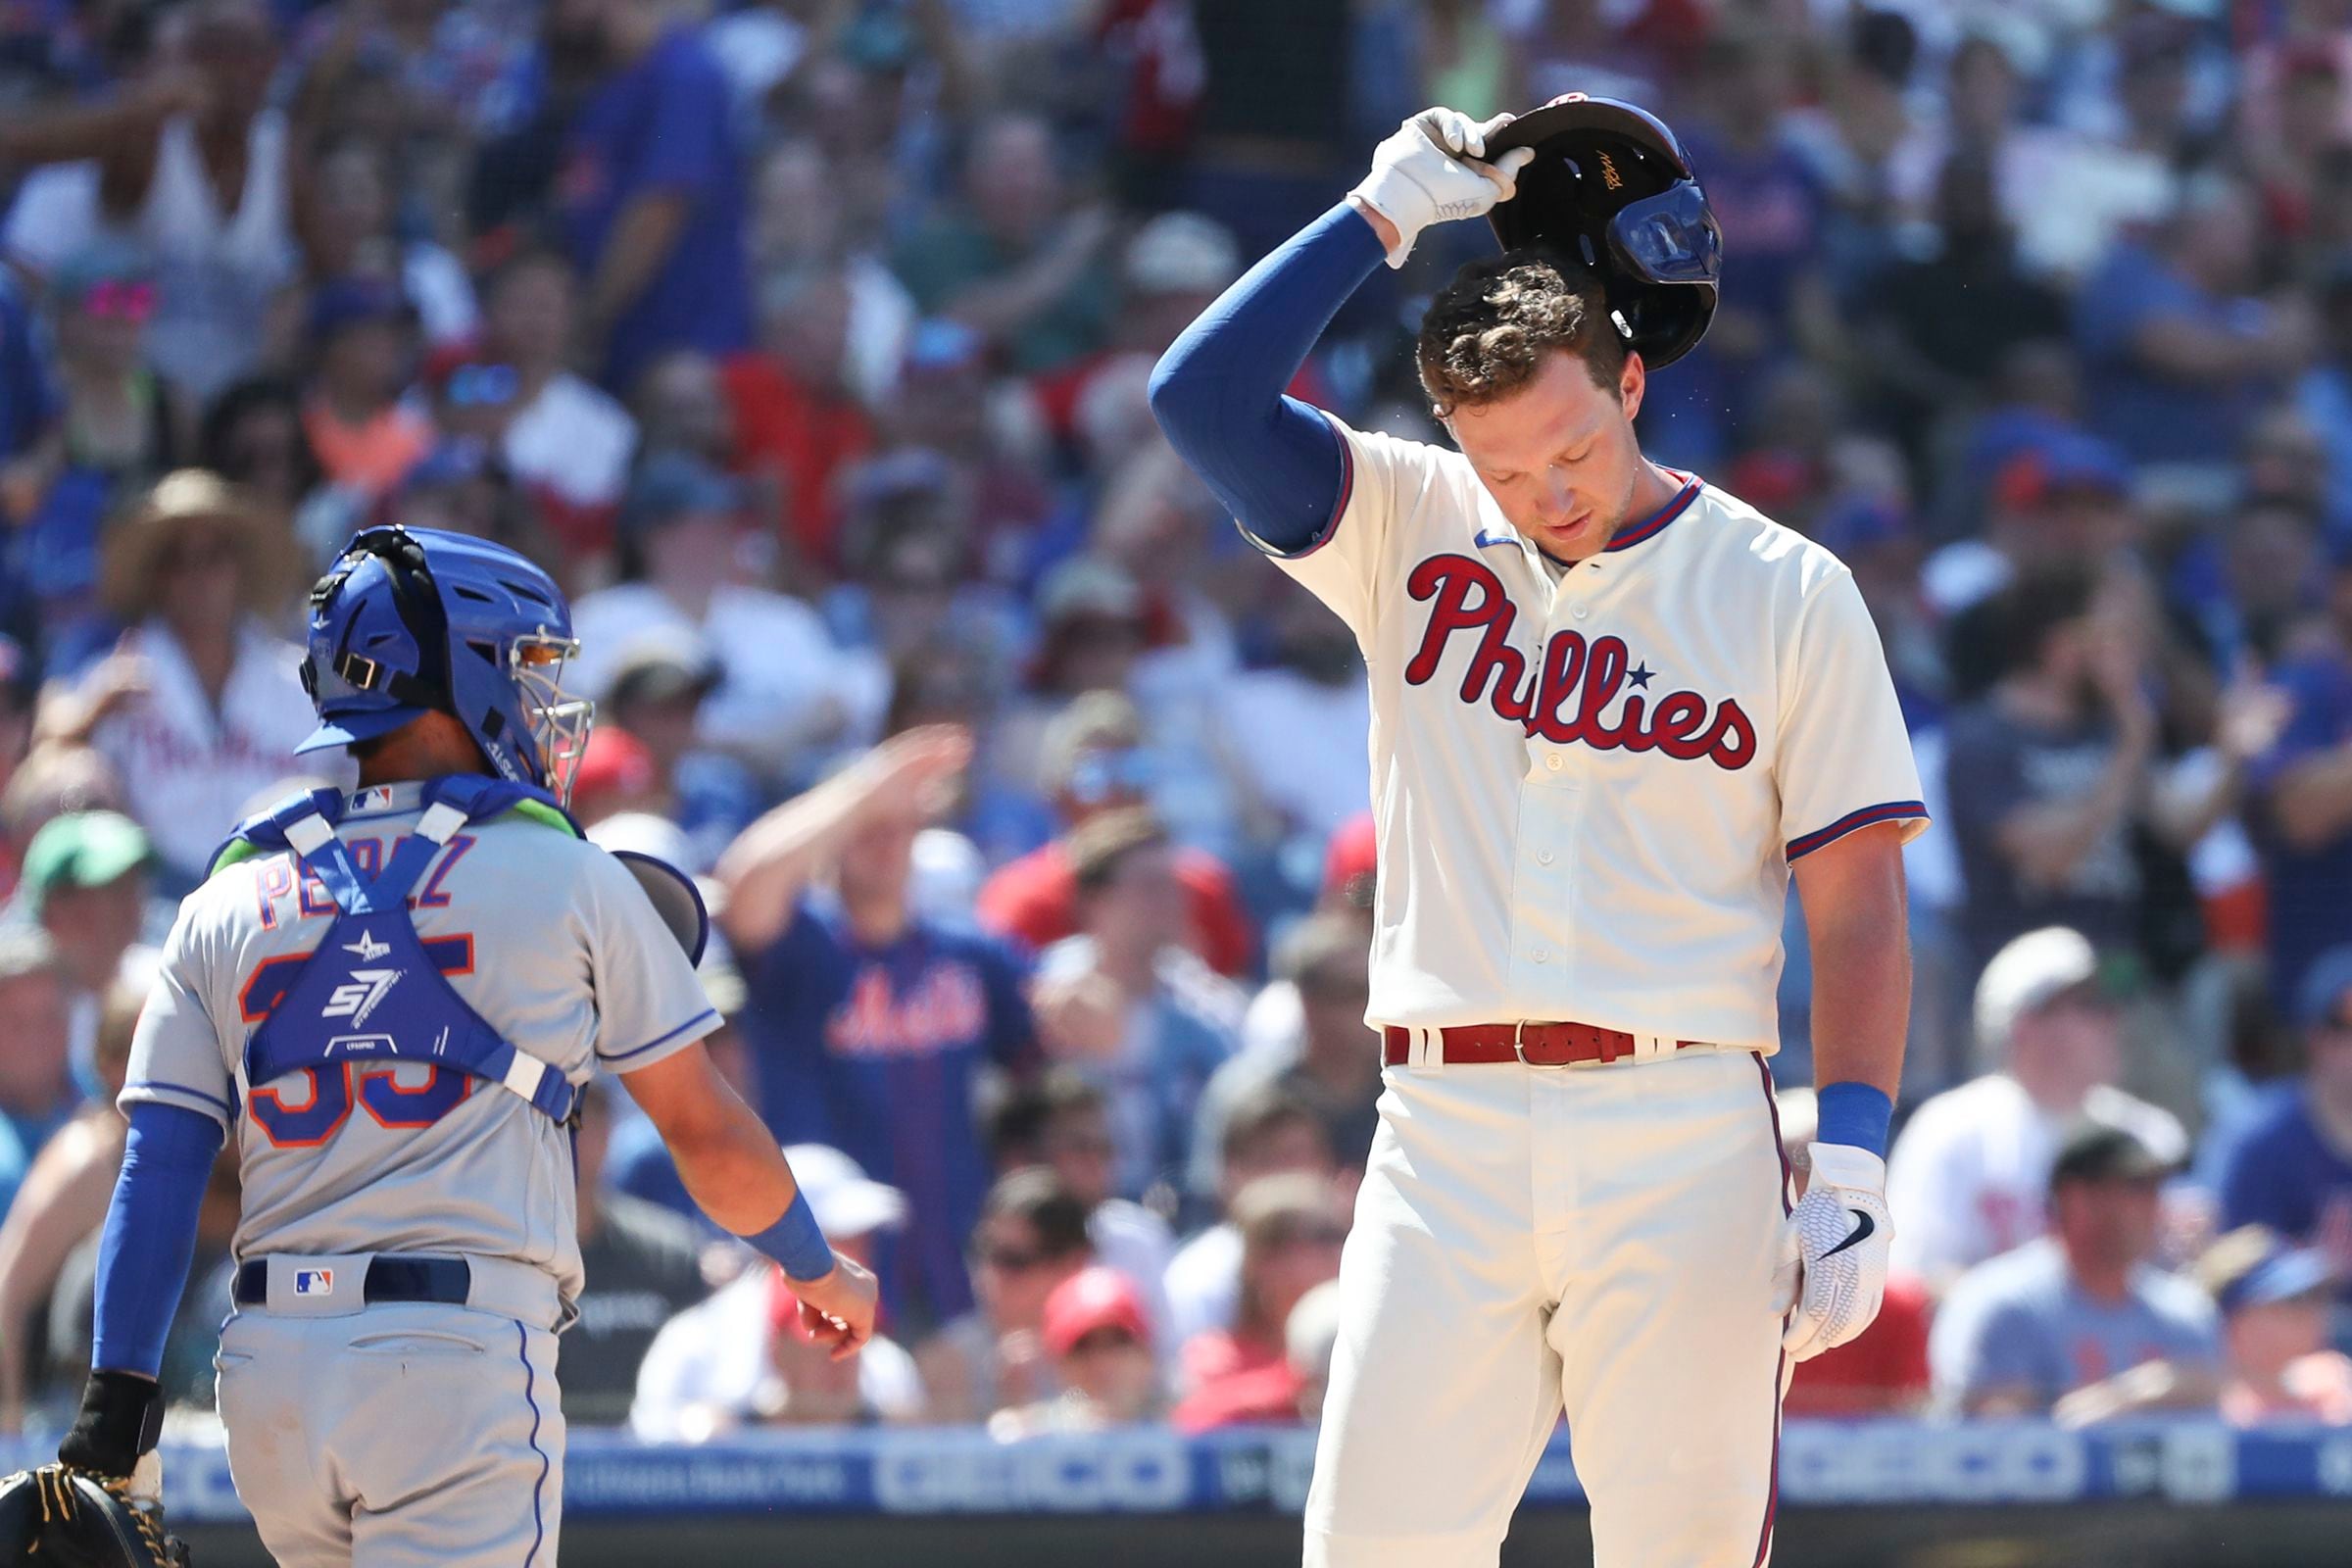 Phillies' starter can't get through fourth inning, just like counterpart  Jacob deGrom